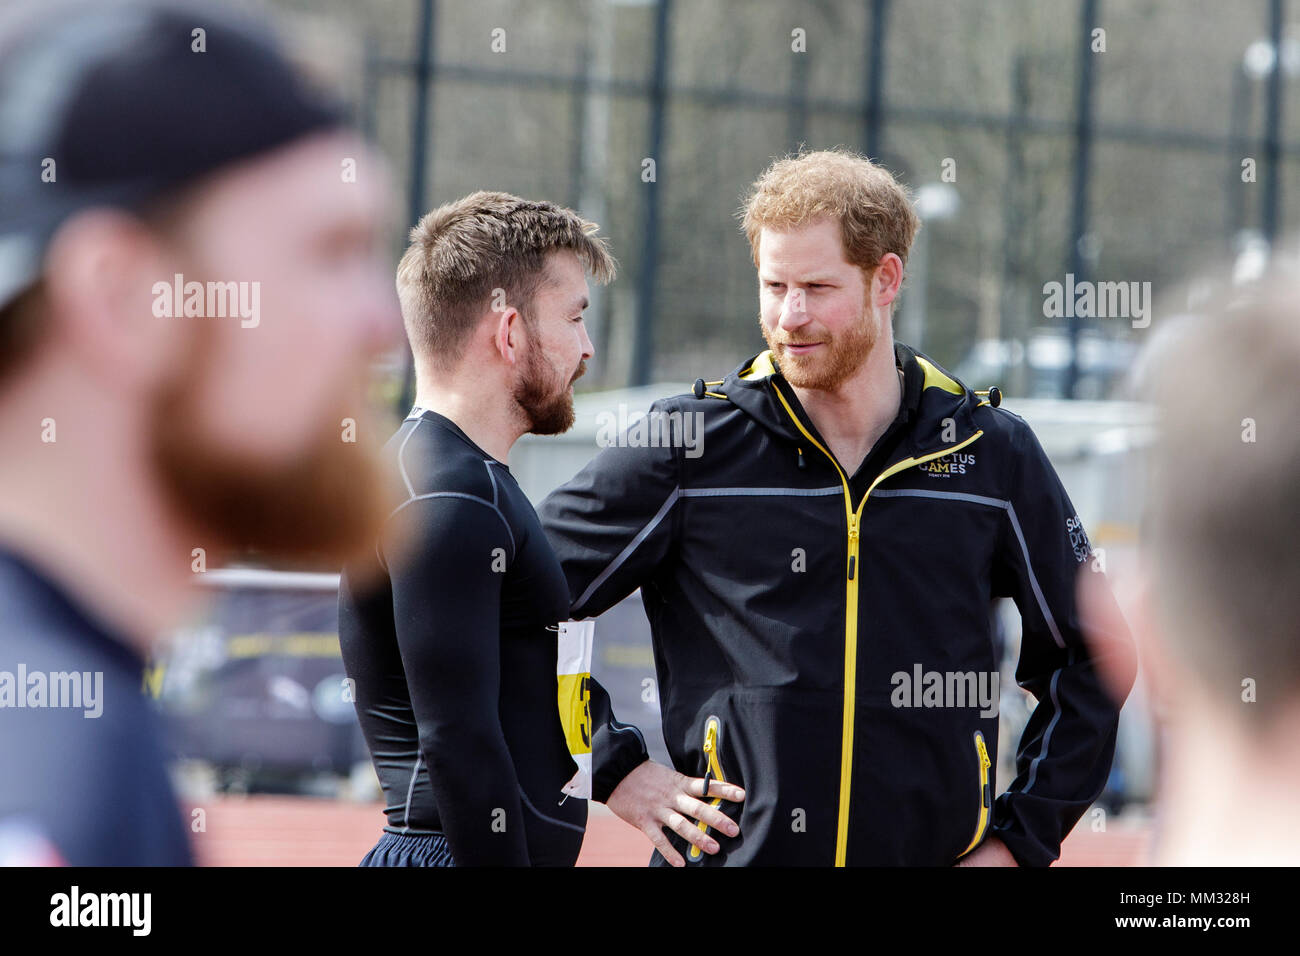 Bath, UK. 6/04/18.Prince Harry and  Meghan Markle are pictured at the University of Bath as they attend the UK team trials for the 2018 Invictus Games Stock Photo